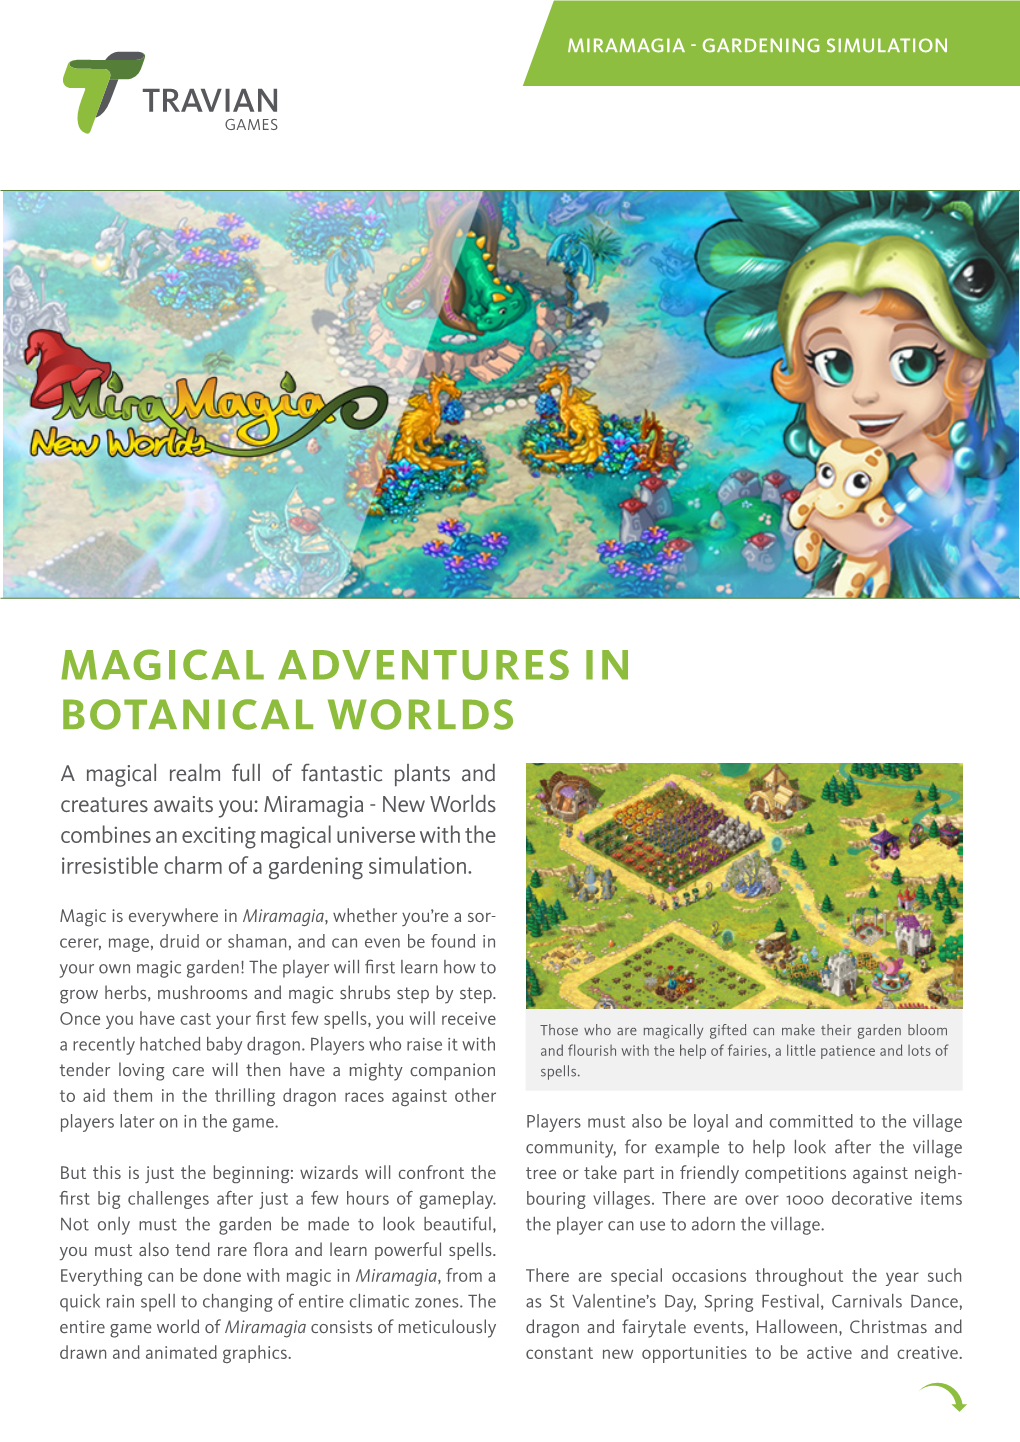 Magical Adventures in Botanical Worlds